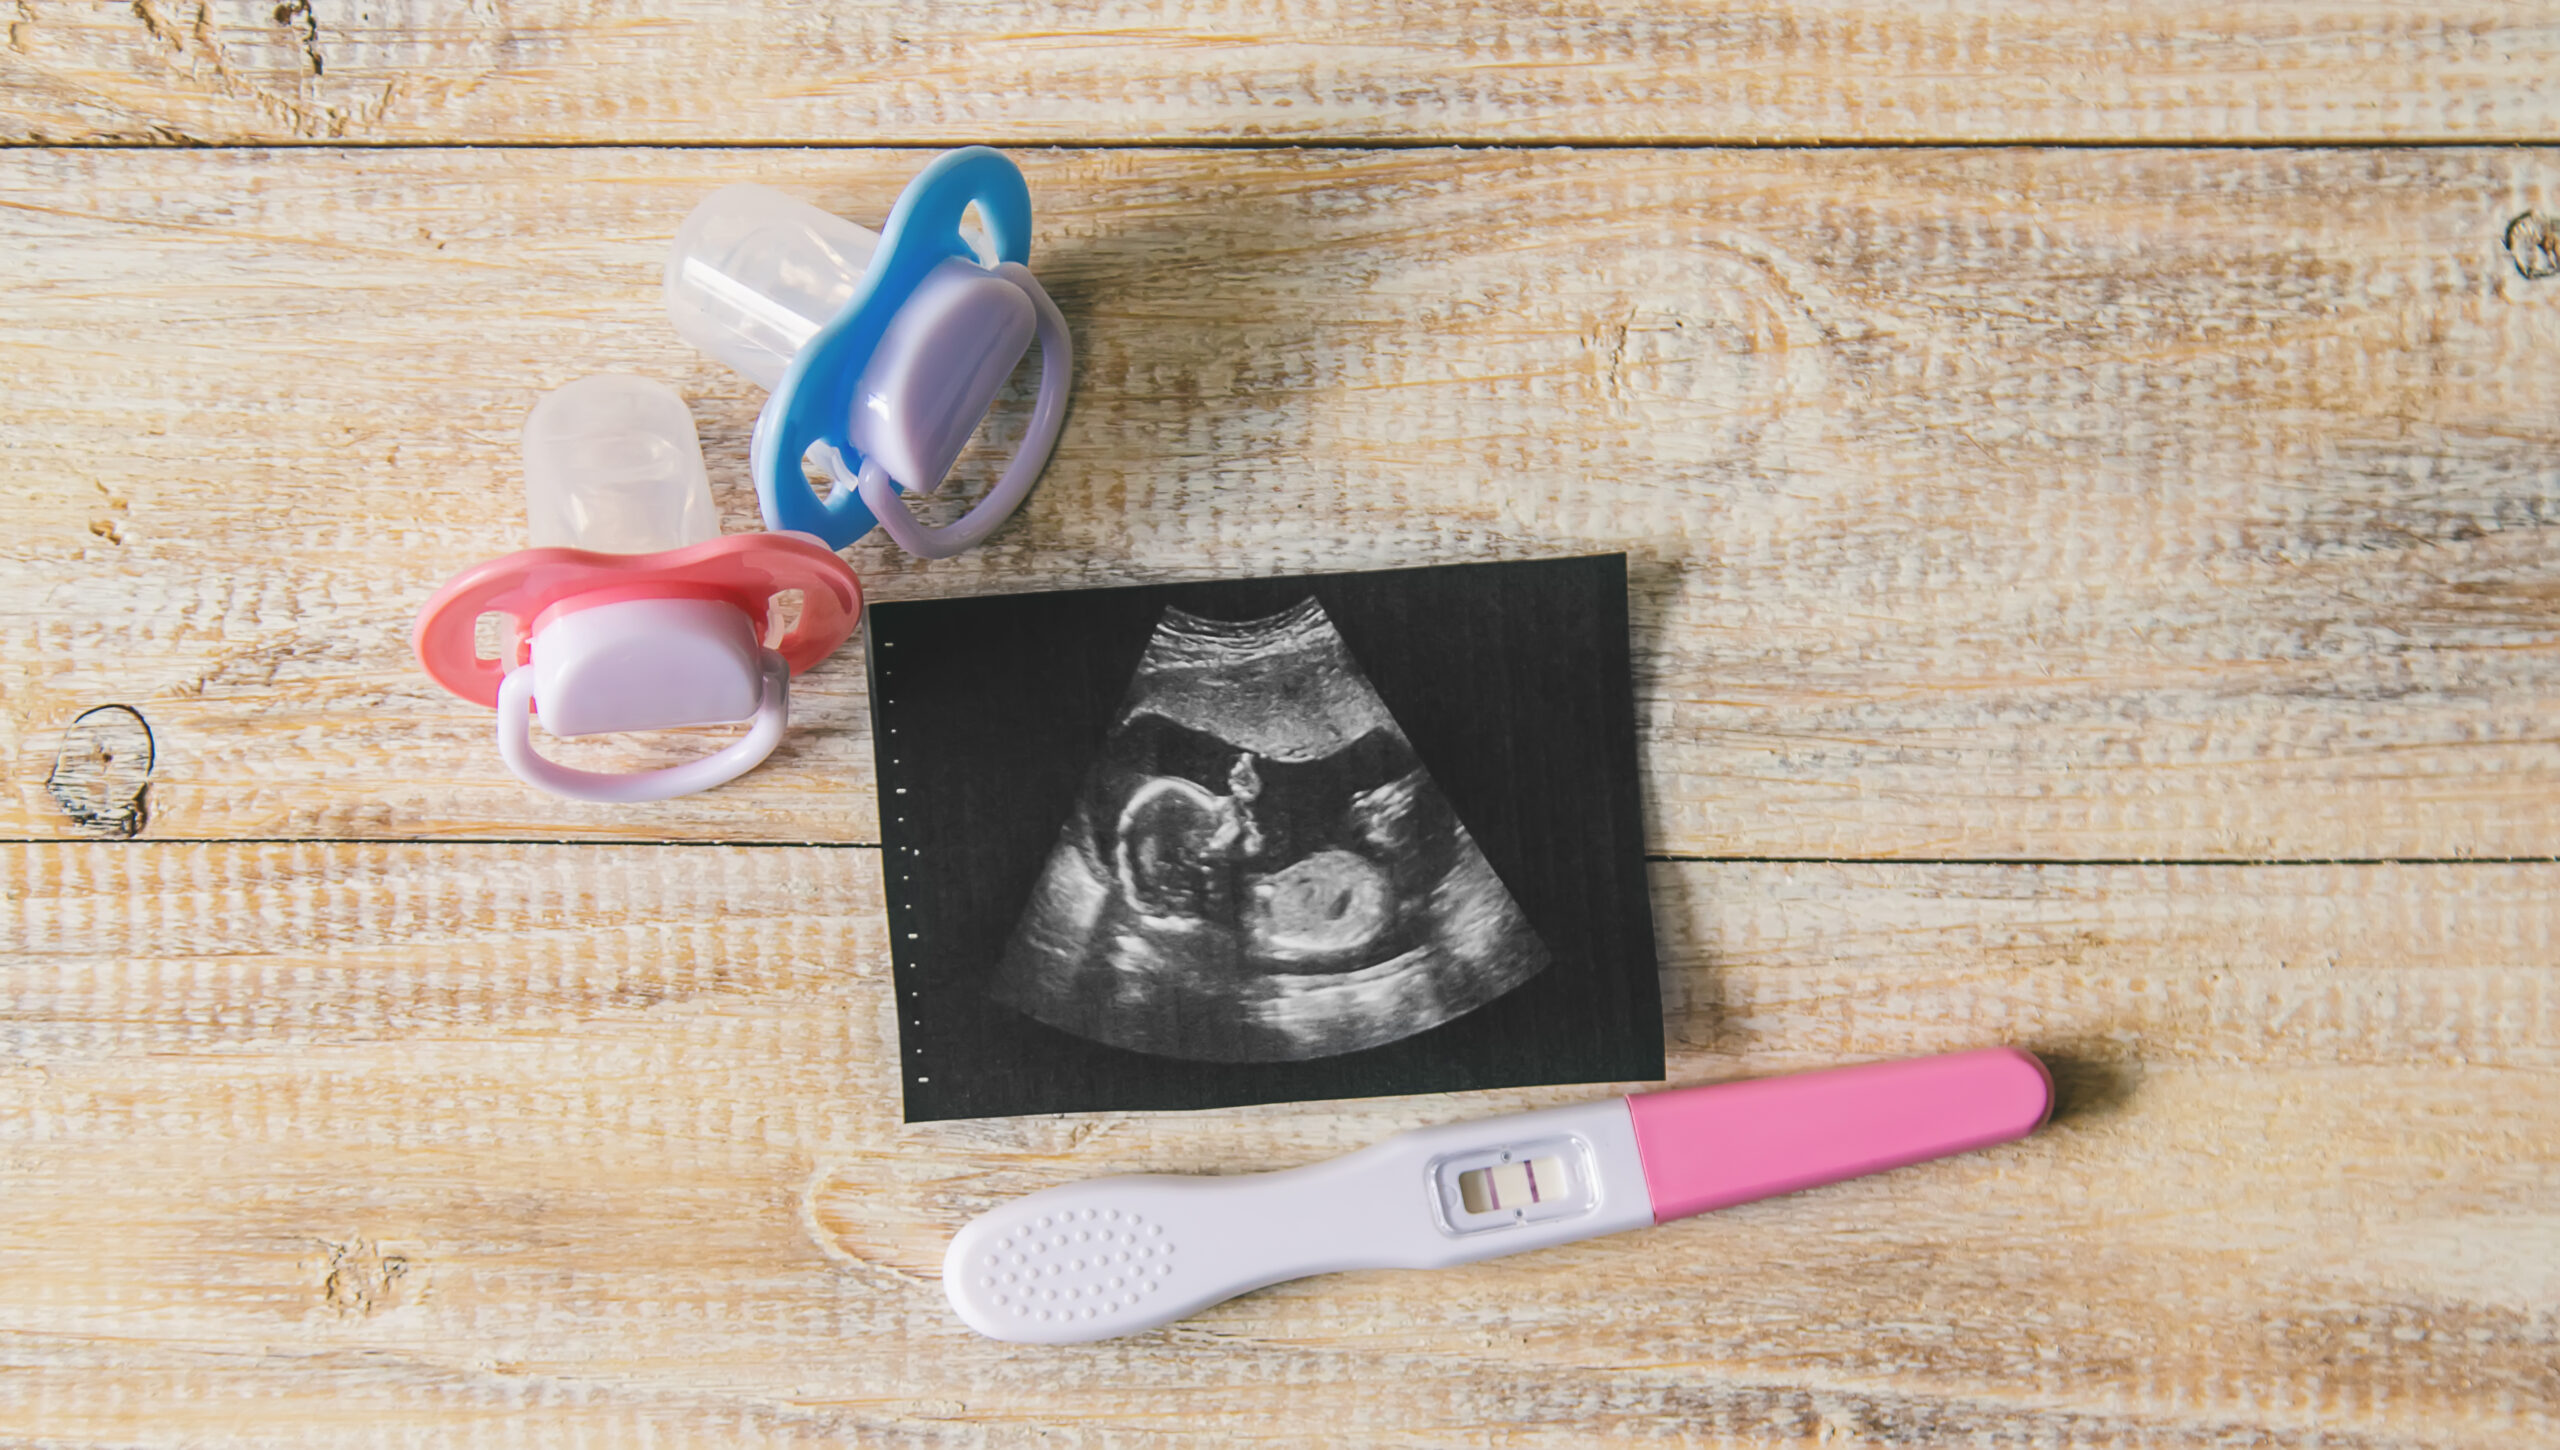 Ultrasound scans at Hello Baby - Prepare for your gender reveal with a early gender scan